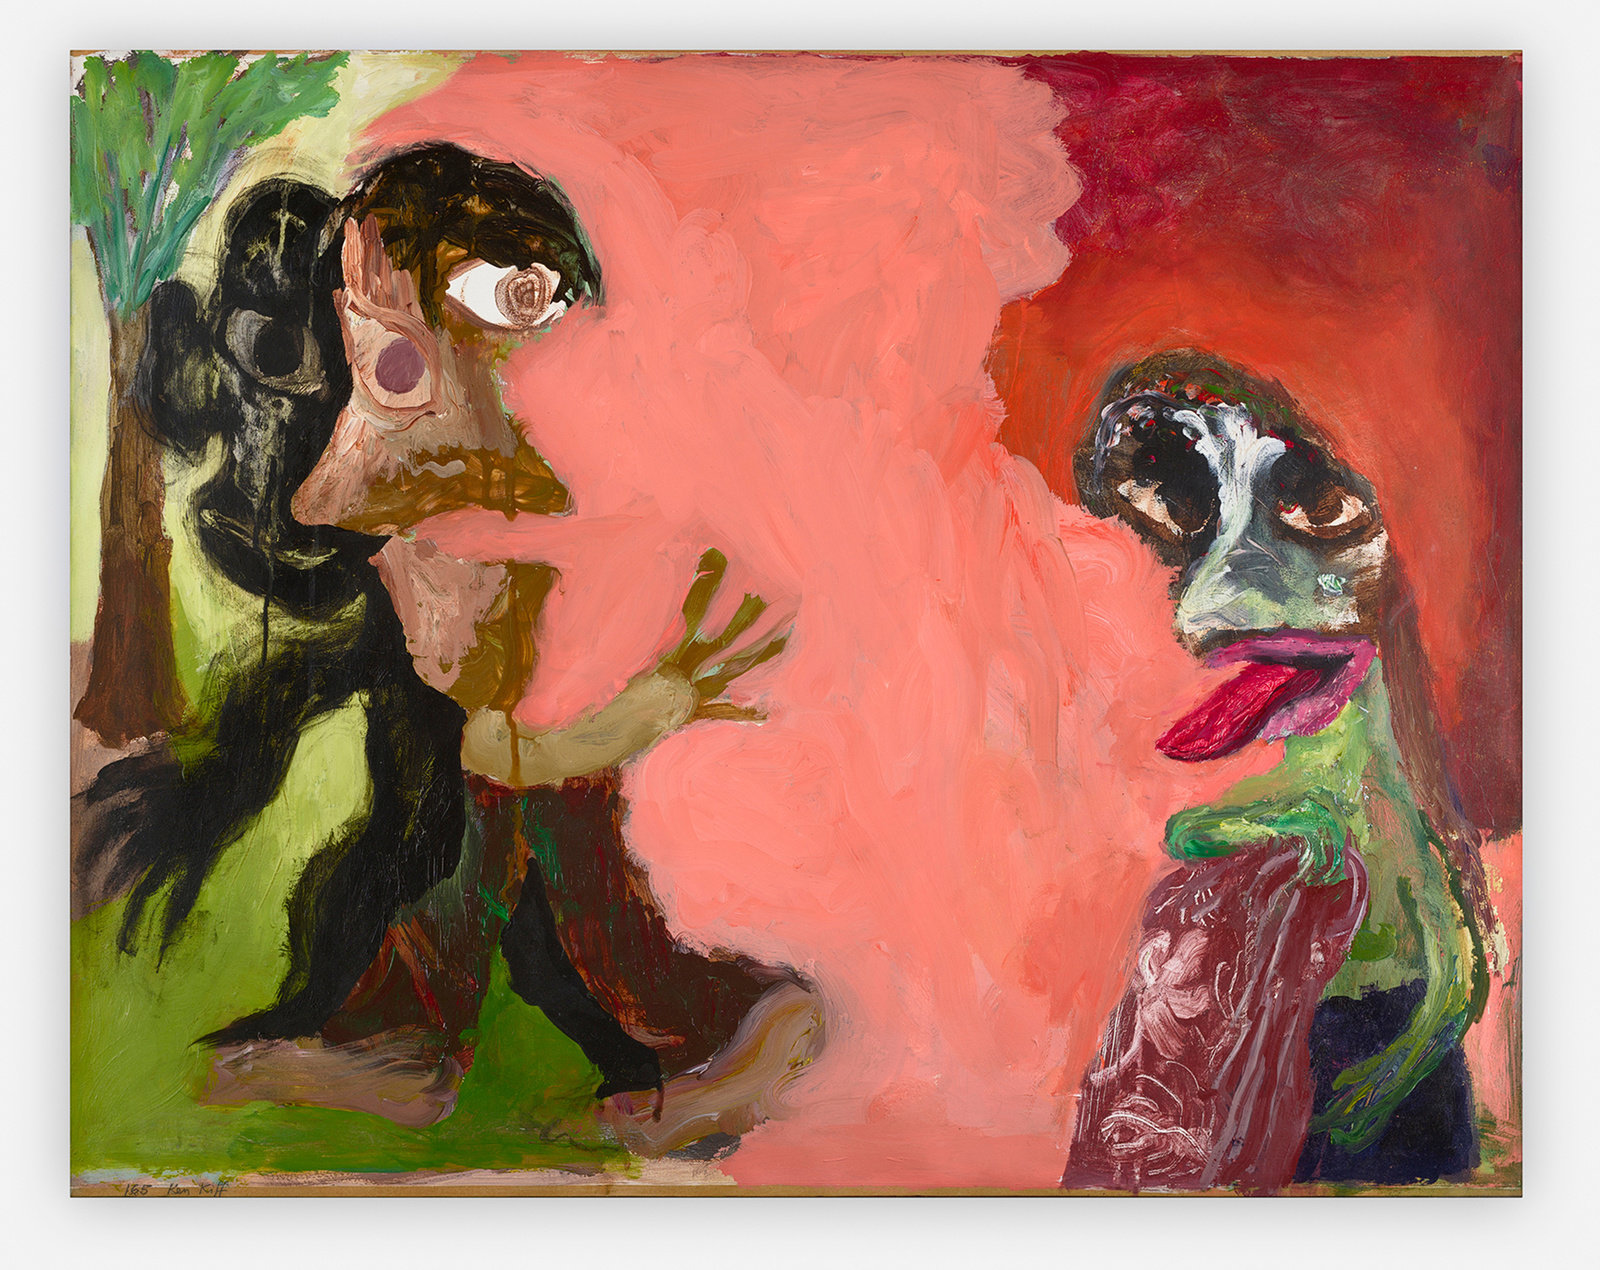 Kiff, (woman with) protruding tongue (sequence no. 165), 1982, acrylic on paper, 26 5 8 x 34 in., 67.5 x 86.5 cm, 306545